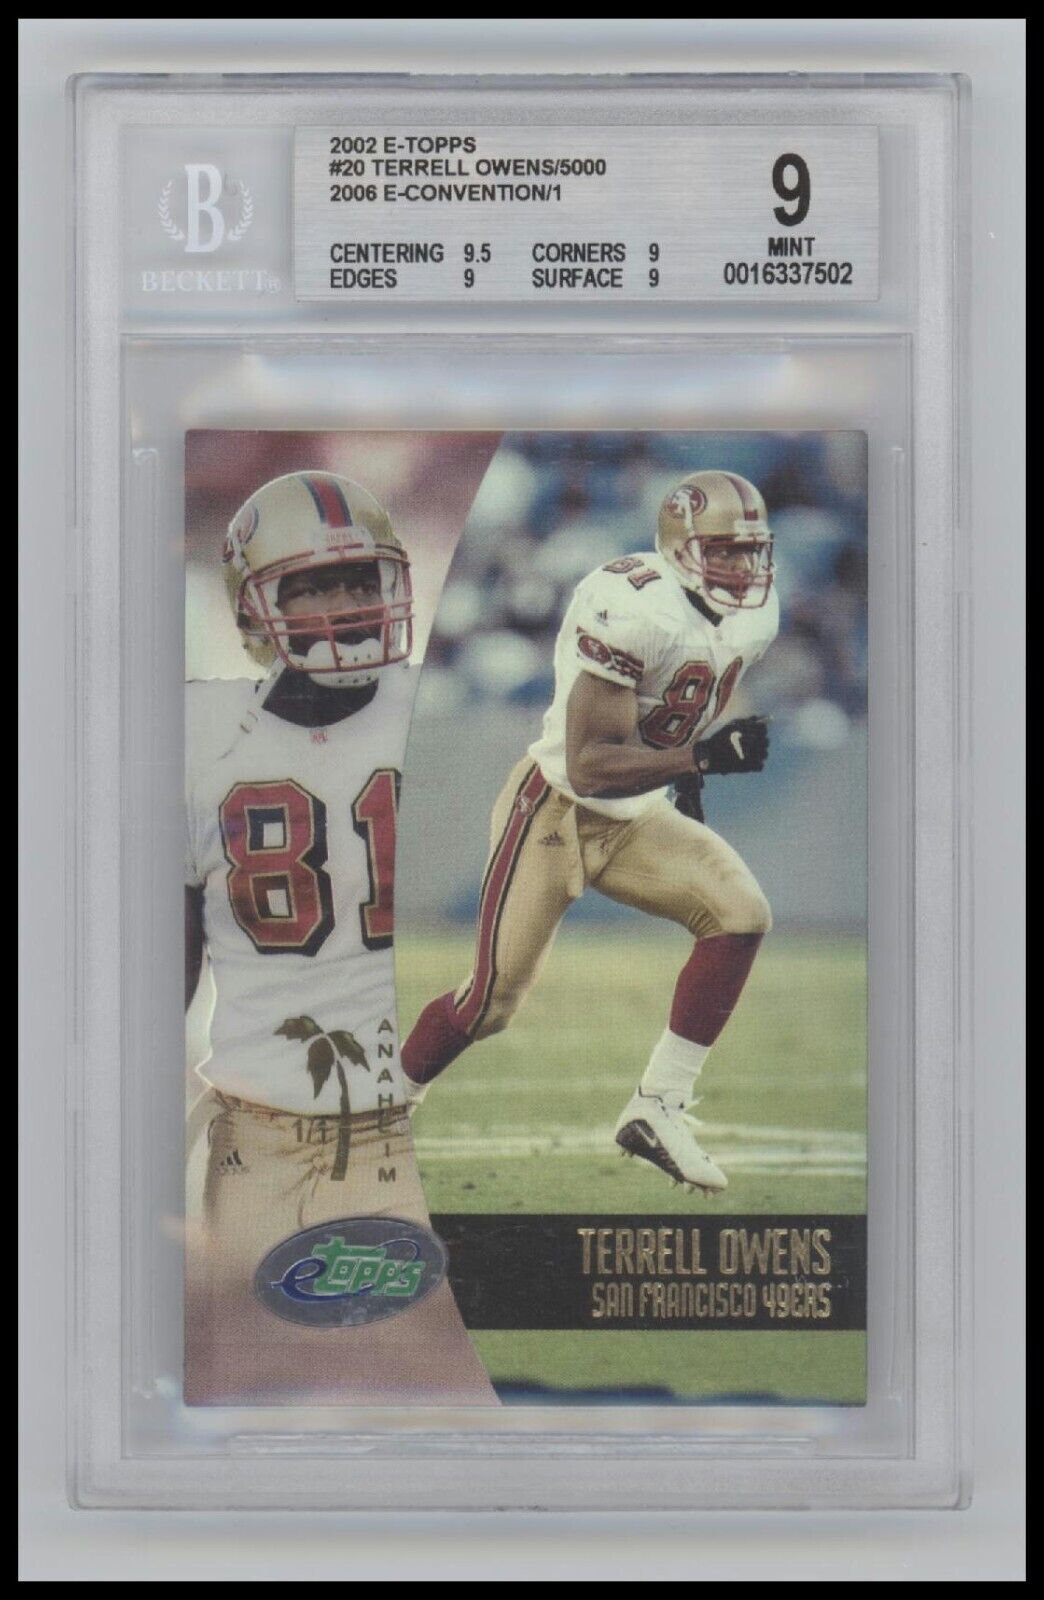 2002 eTopps Terrell Owenes National Convention 1/1 BGS 9